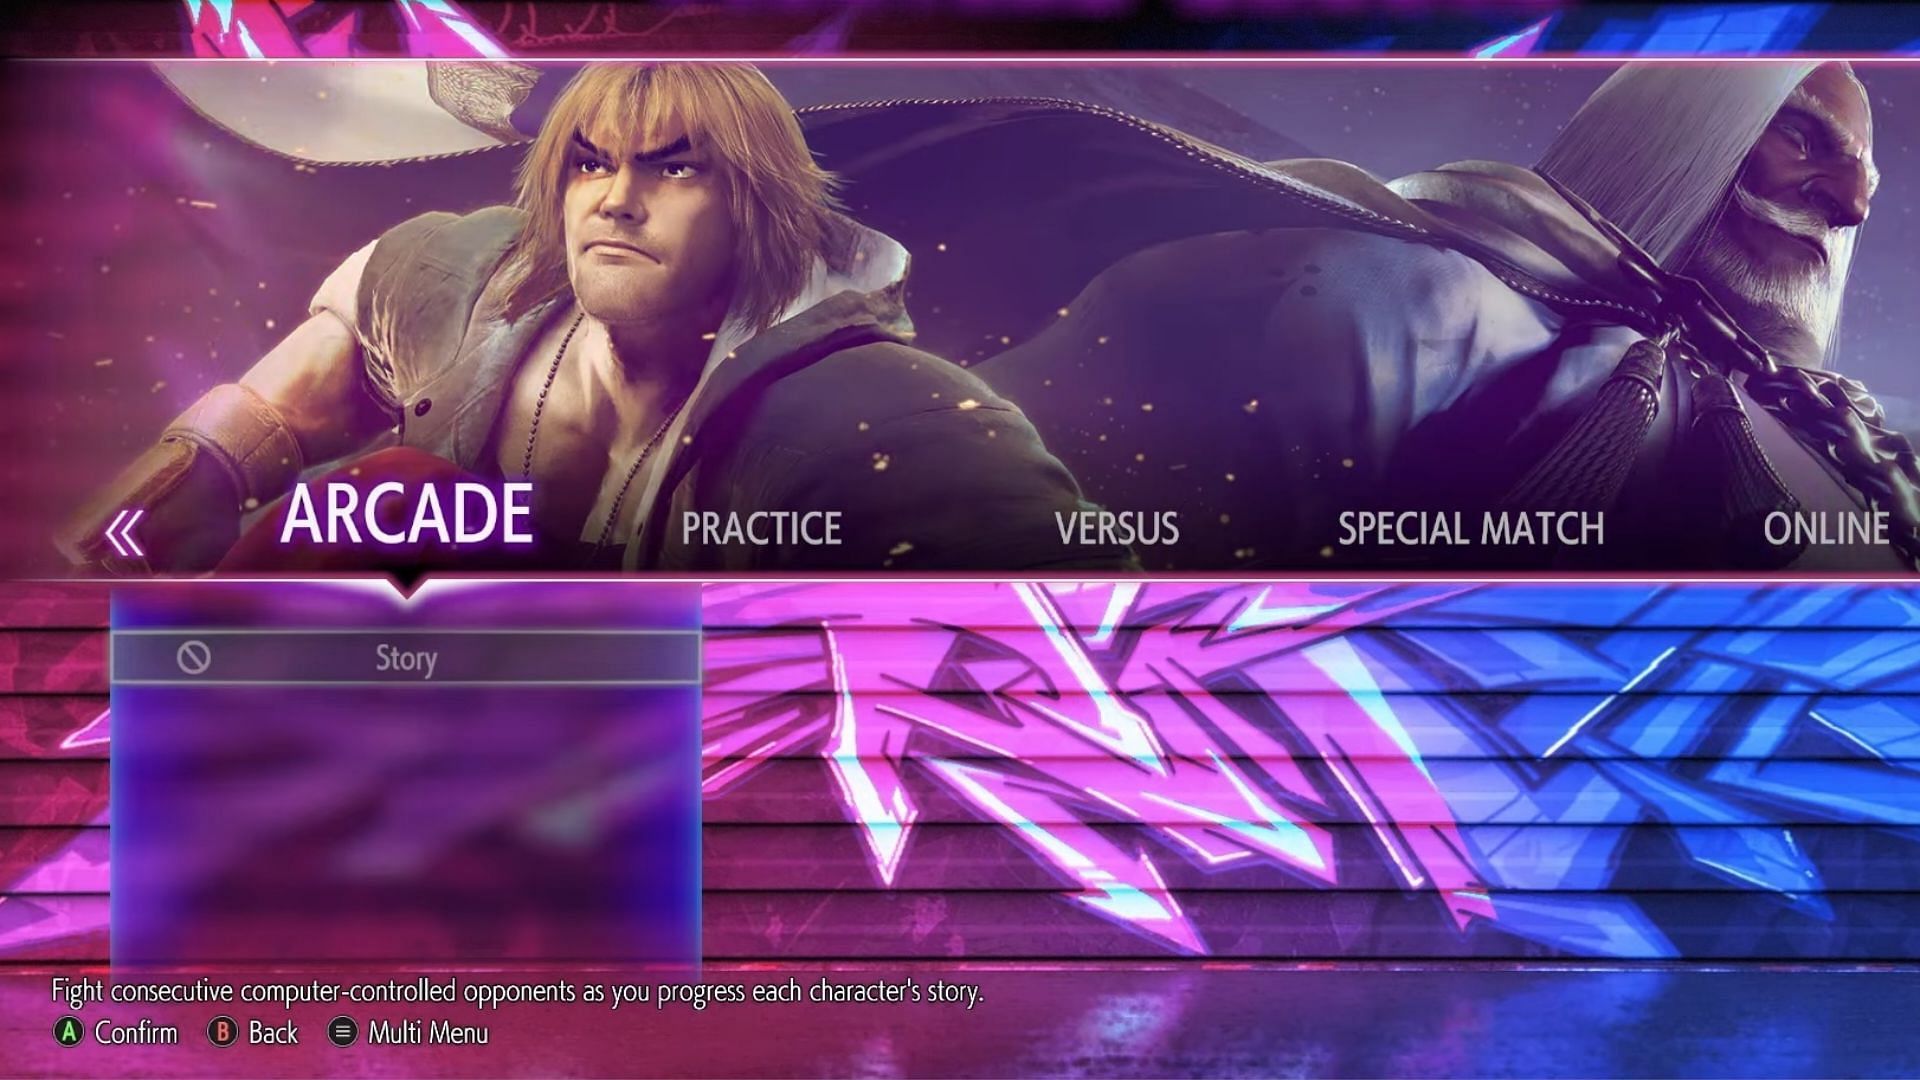 Arcade mode allows one to experience a character&#039;s story (Image via Capcom)